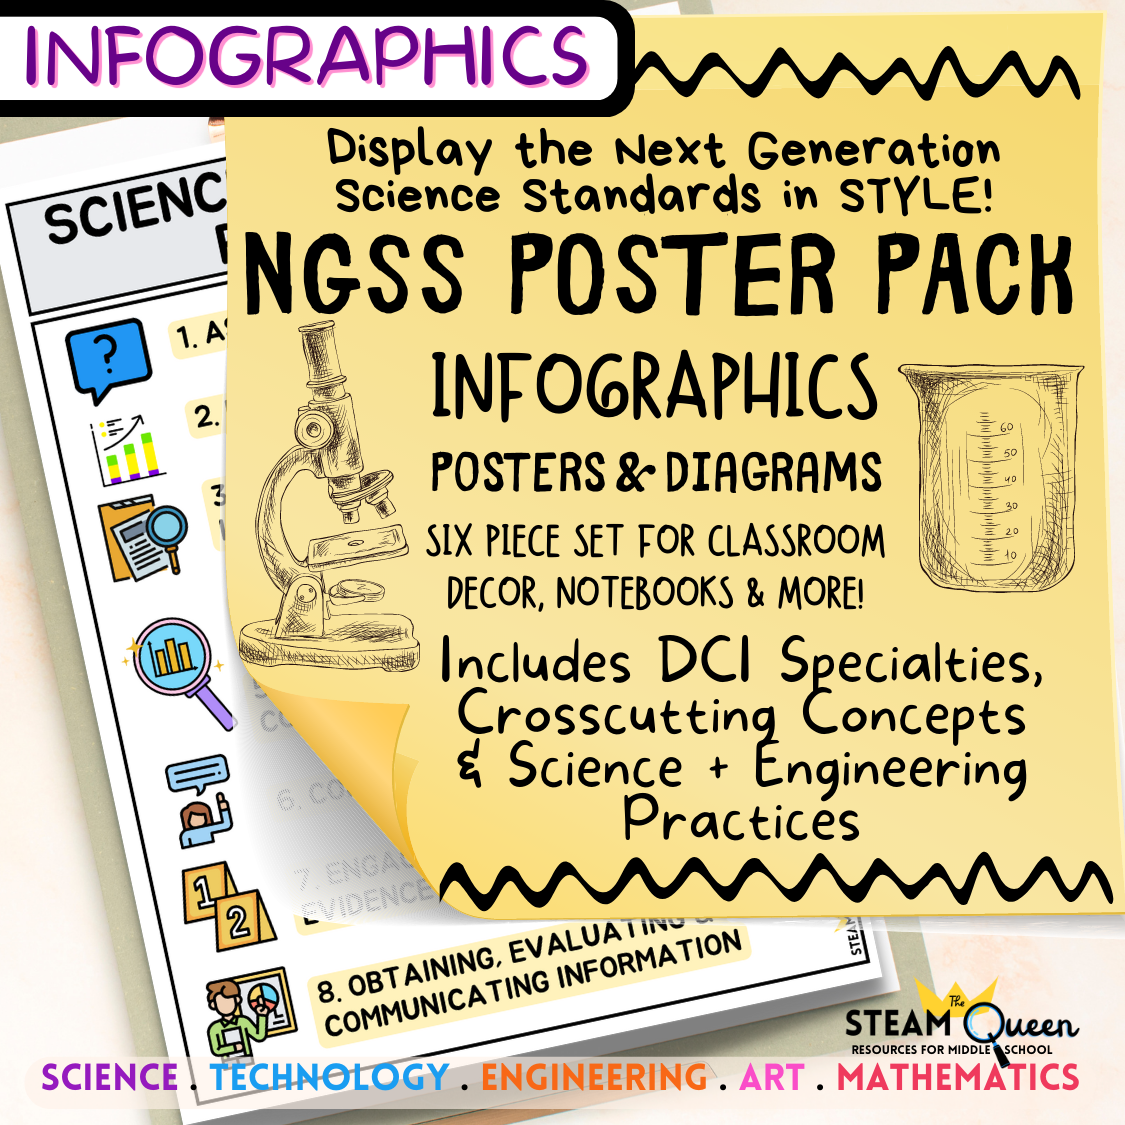 NGSS Poster Pack: Set of 6 Infographics Branches of Science, Science and Engineering Practices and Crosscutting Concepts